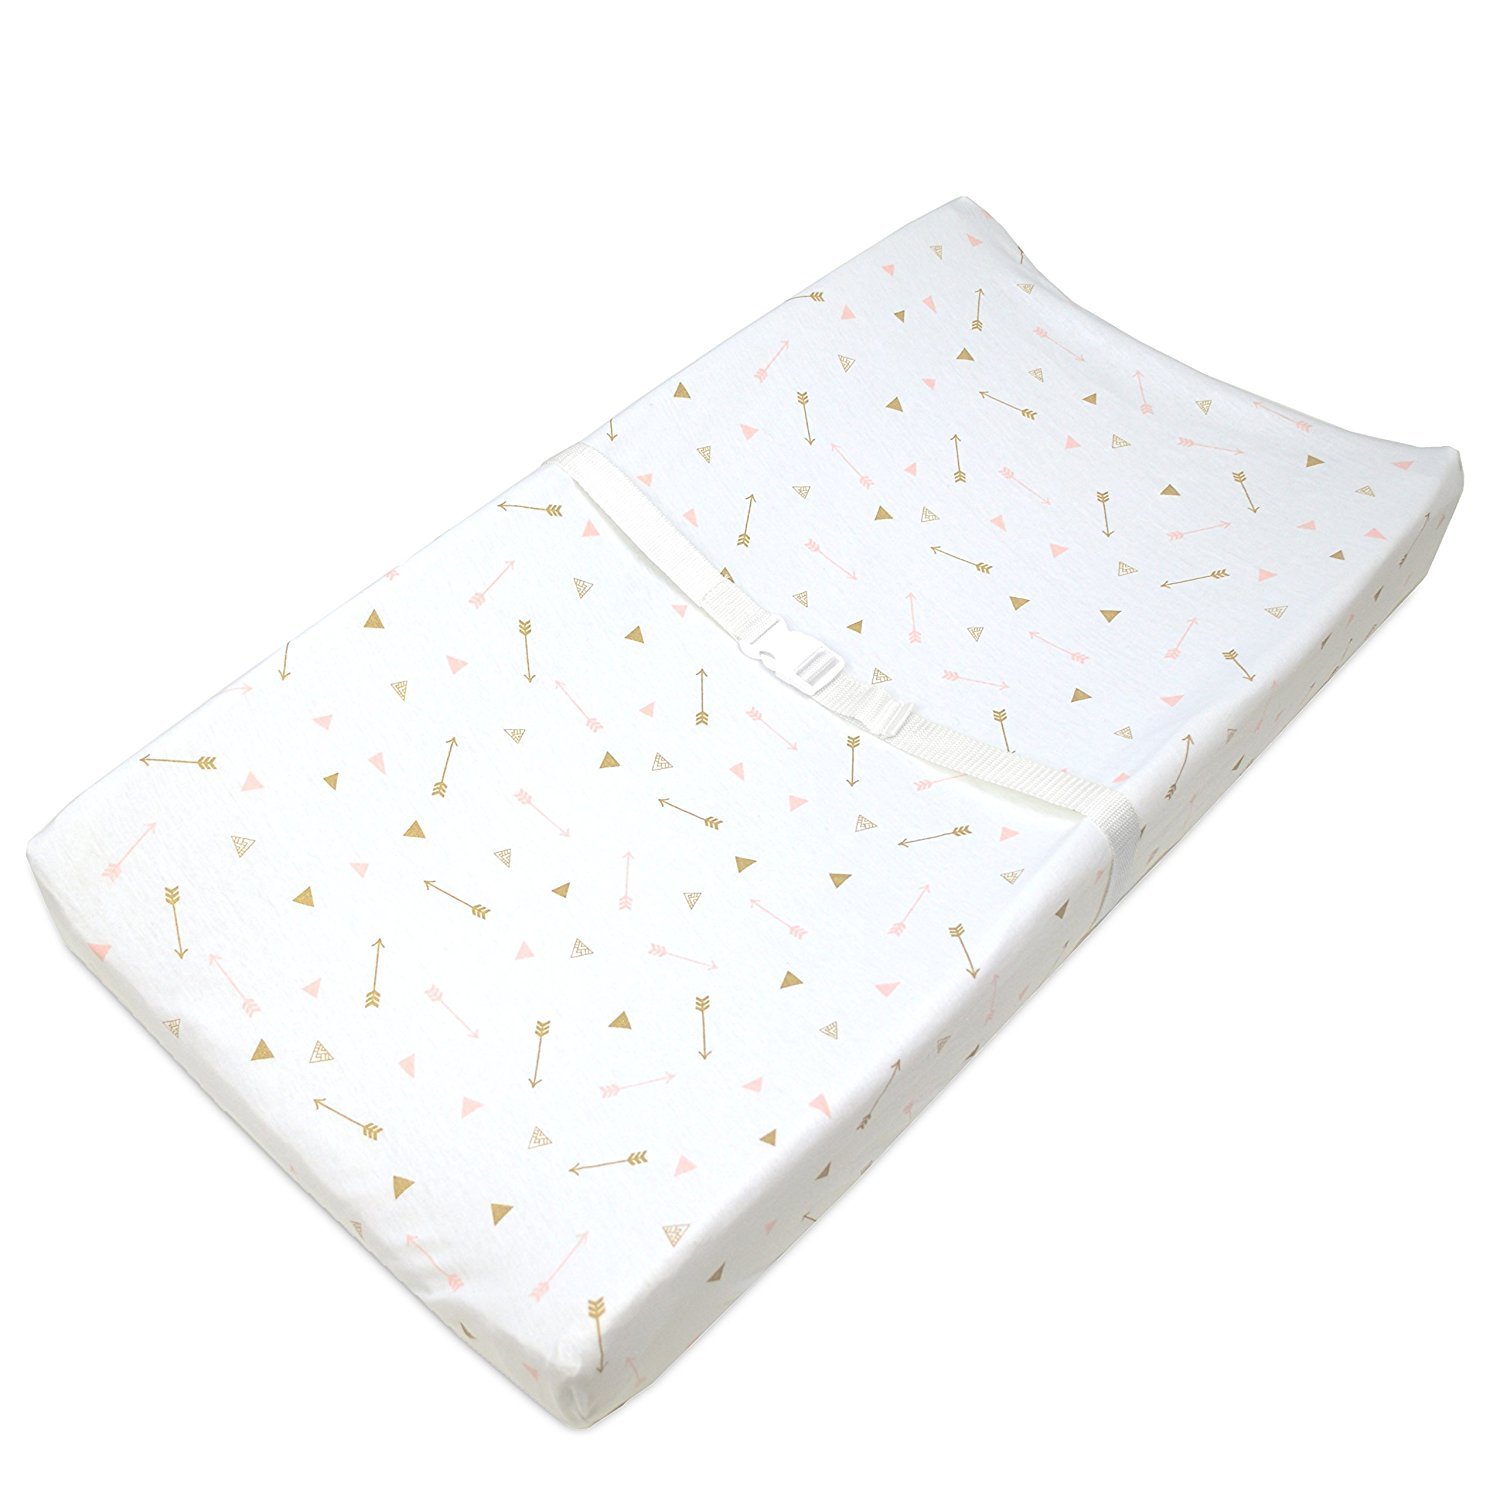 American Baby Company Printed 100% Cotton Knit Fitted Contoured Changing Table Pad Cover/Sheet - Compatible with Mika Micky Bassinet, Sparkle Gold/Pink Arrows, for Boys and Girls